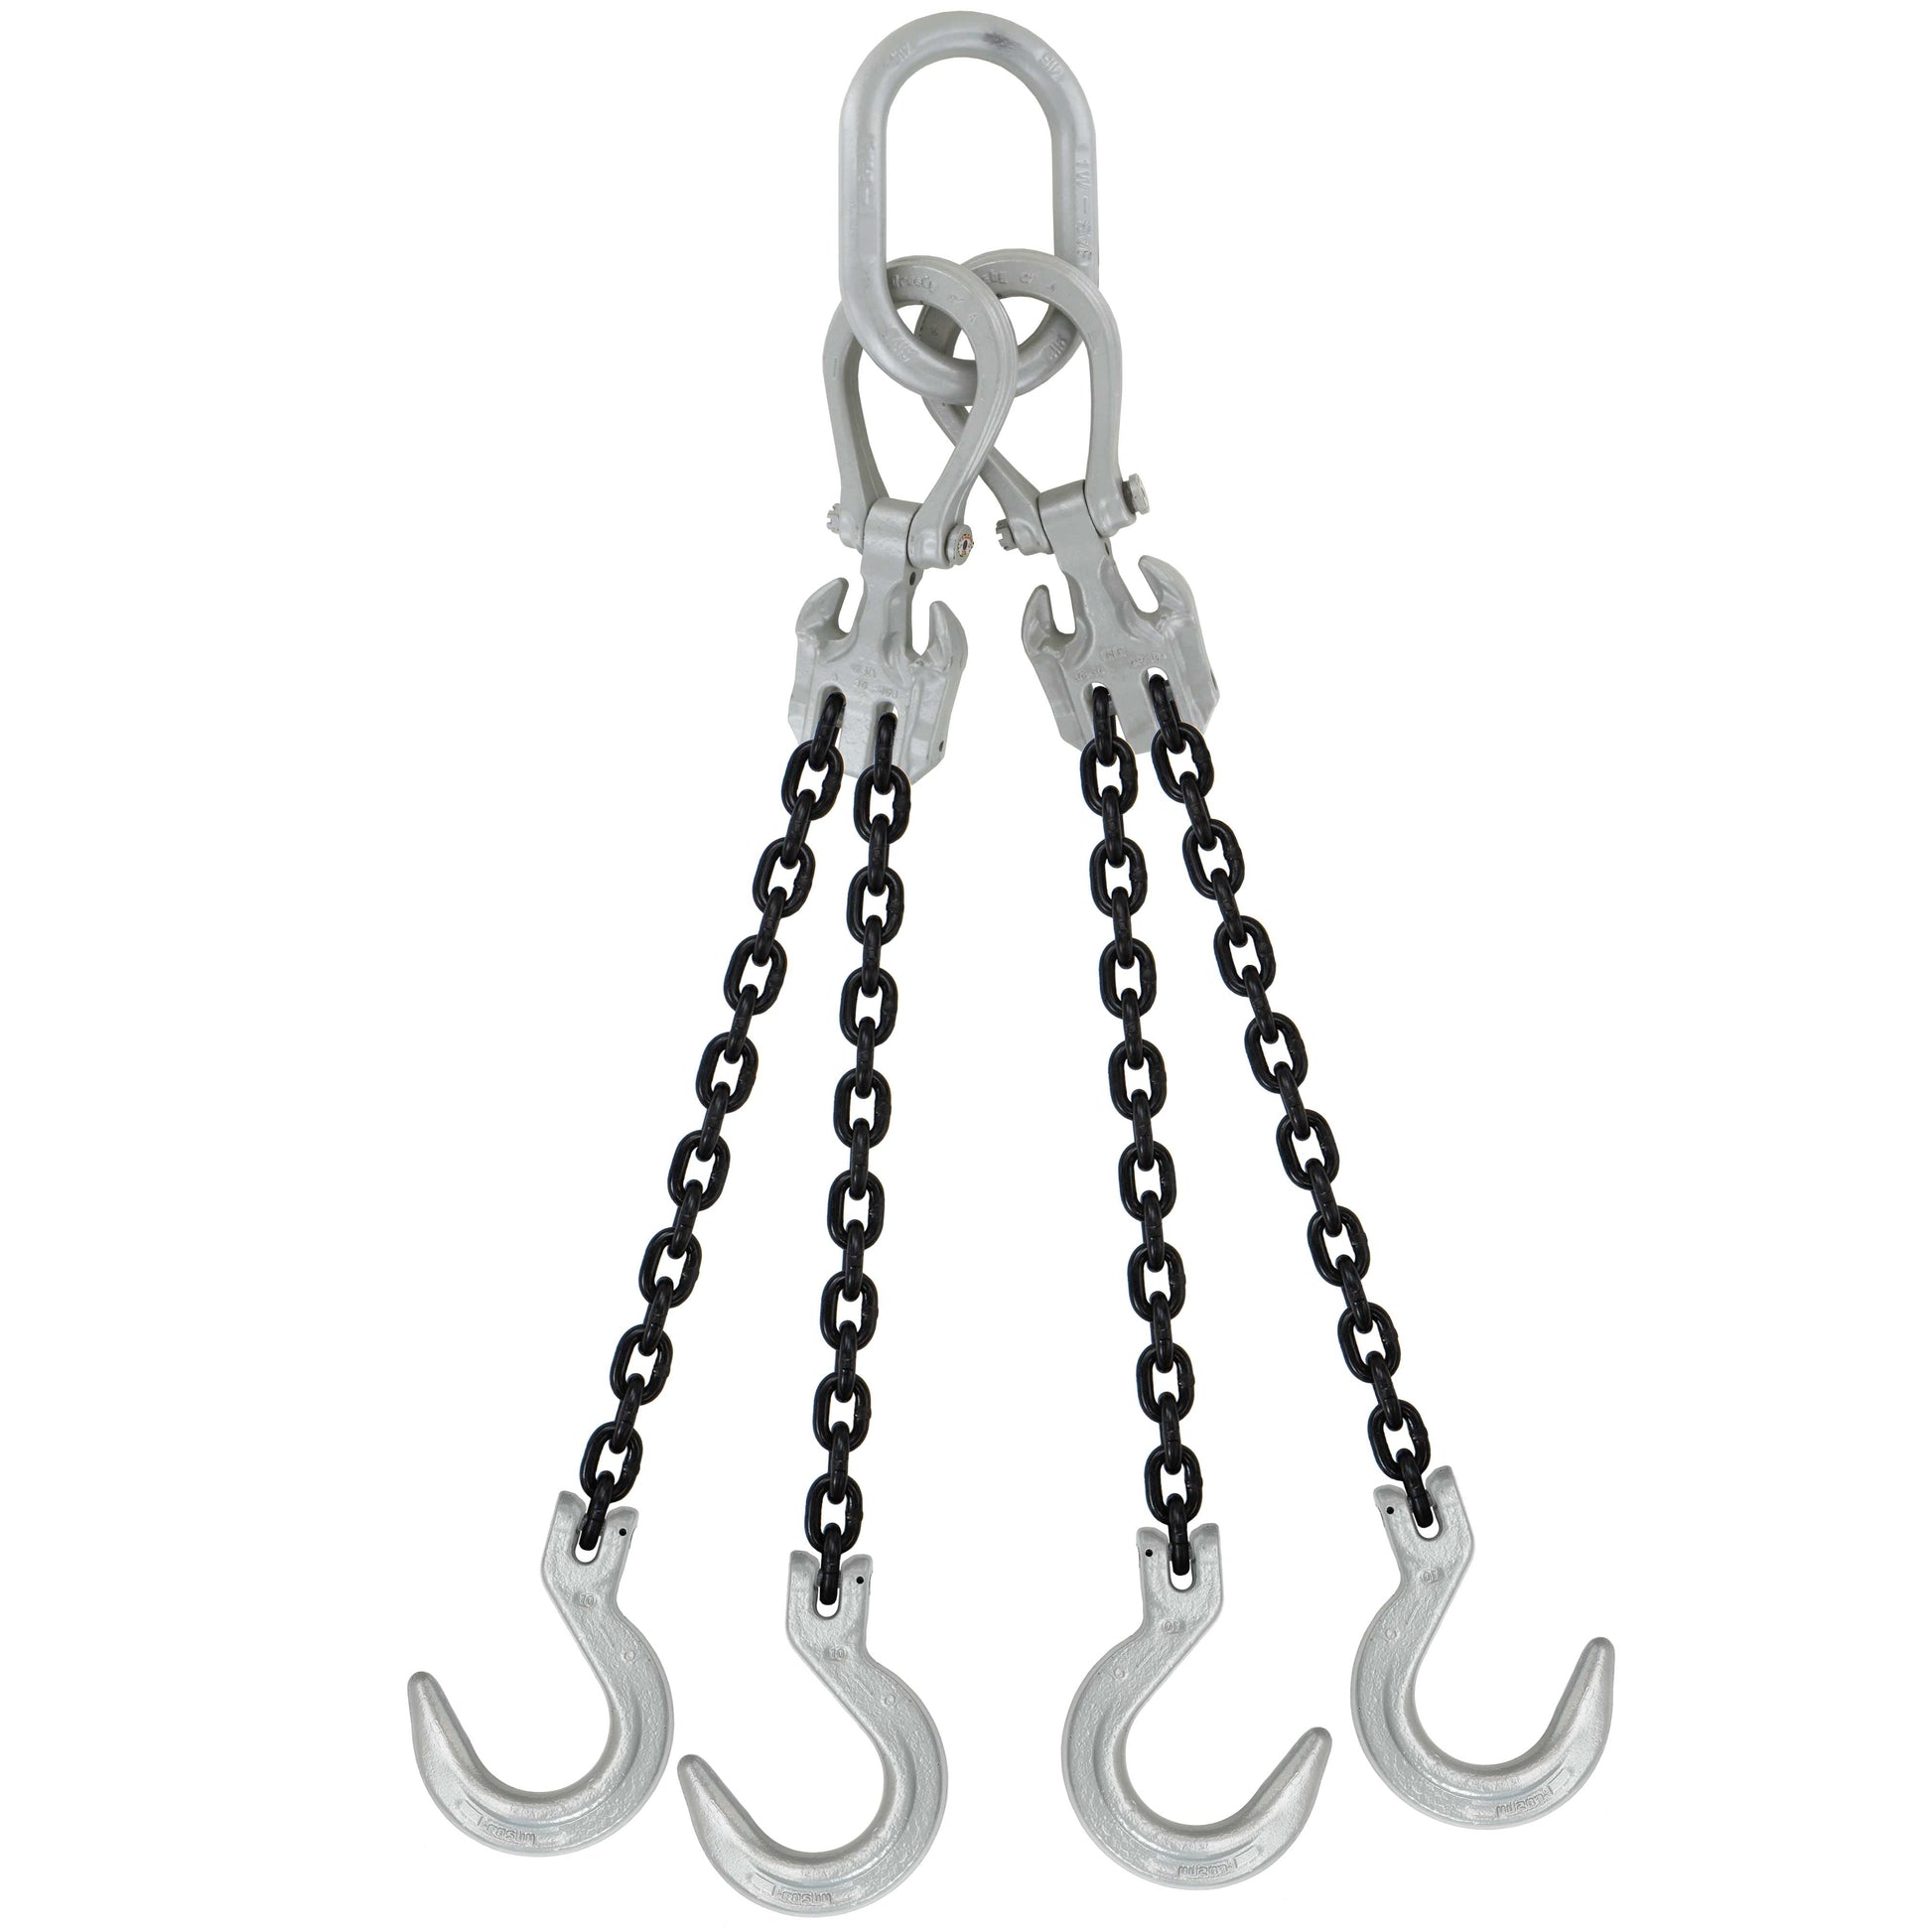 38 inch x 5 foot Domestic Adjustable 4 Leg Chain Sling w Crosby Foundry Hooks Grade 100 image 1 of 2